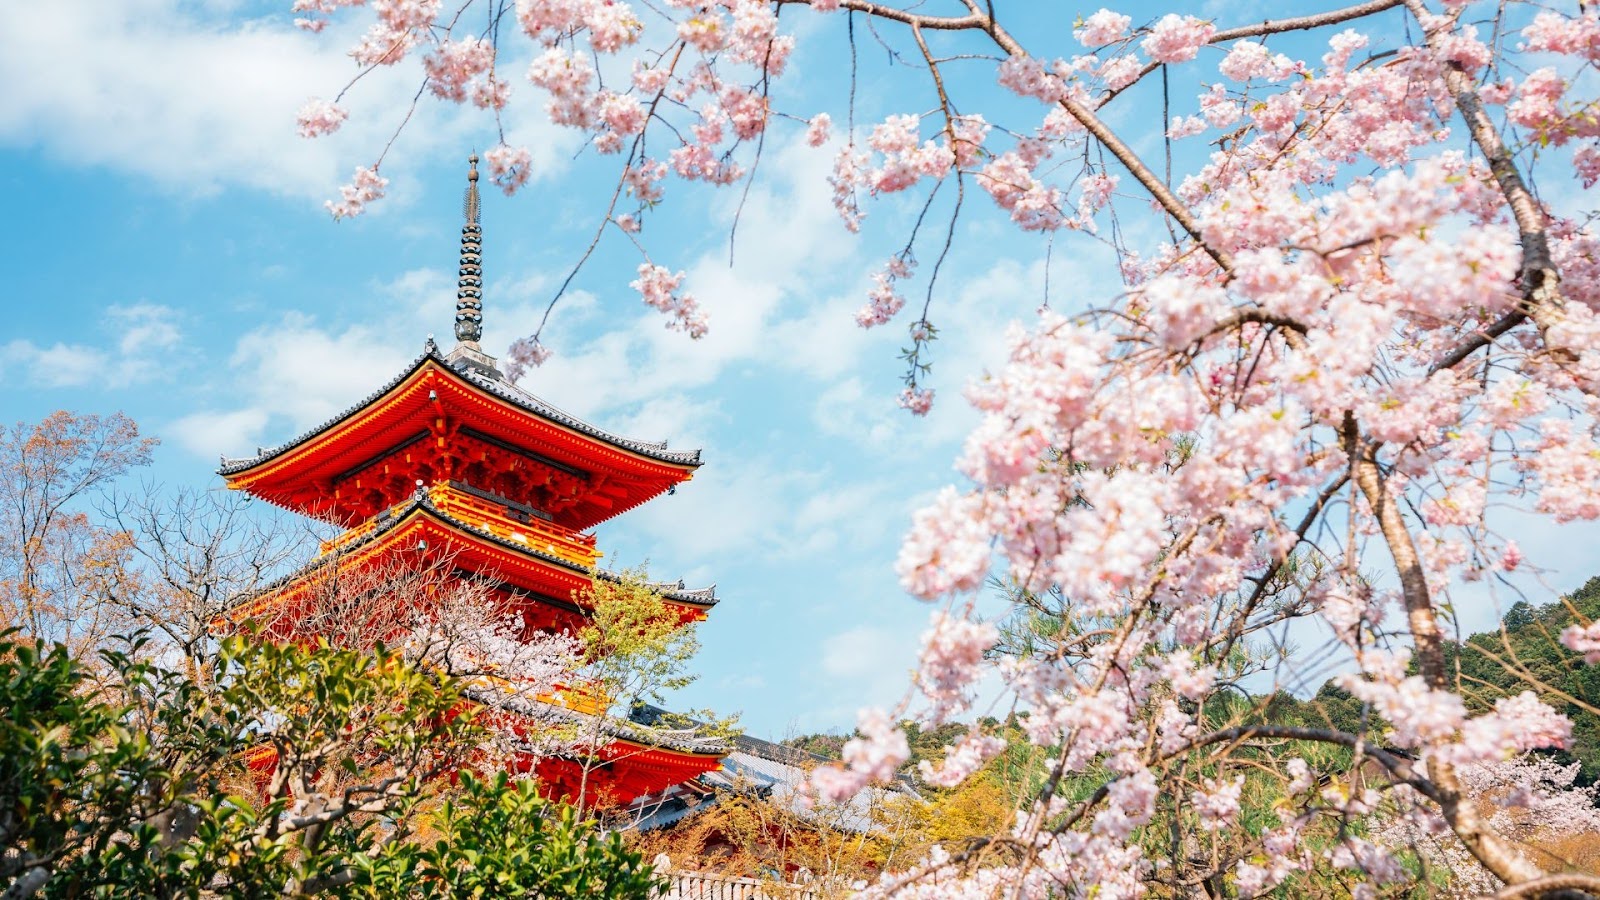 Best Vacation Spots for Couples - Kyoto